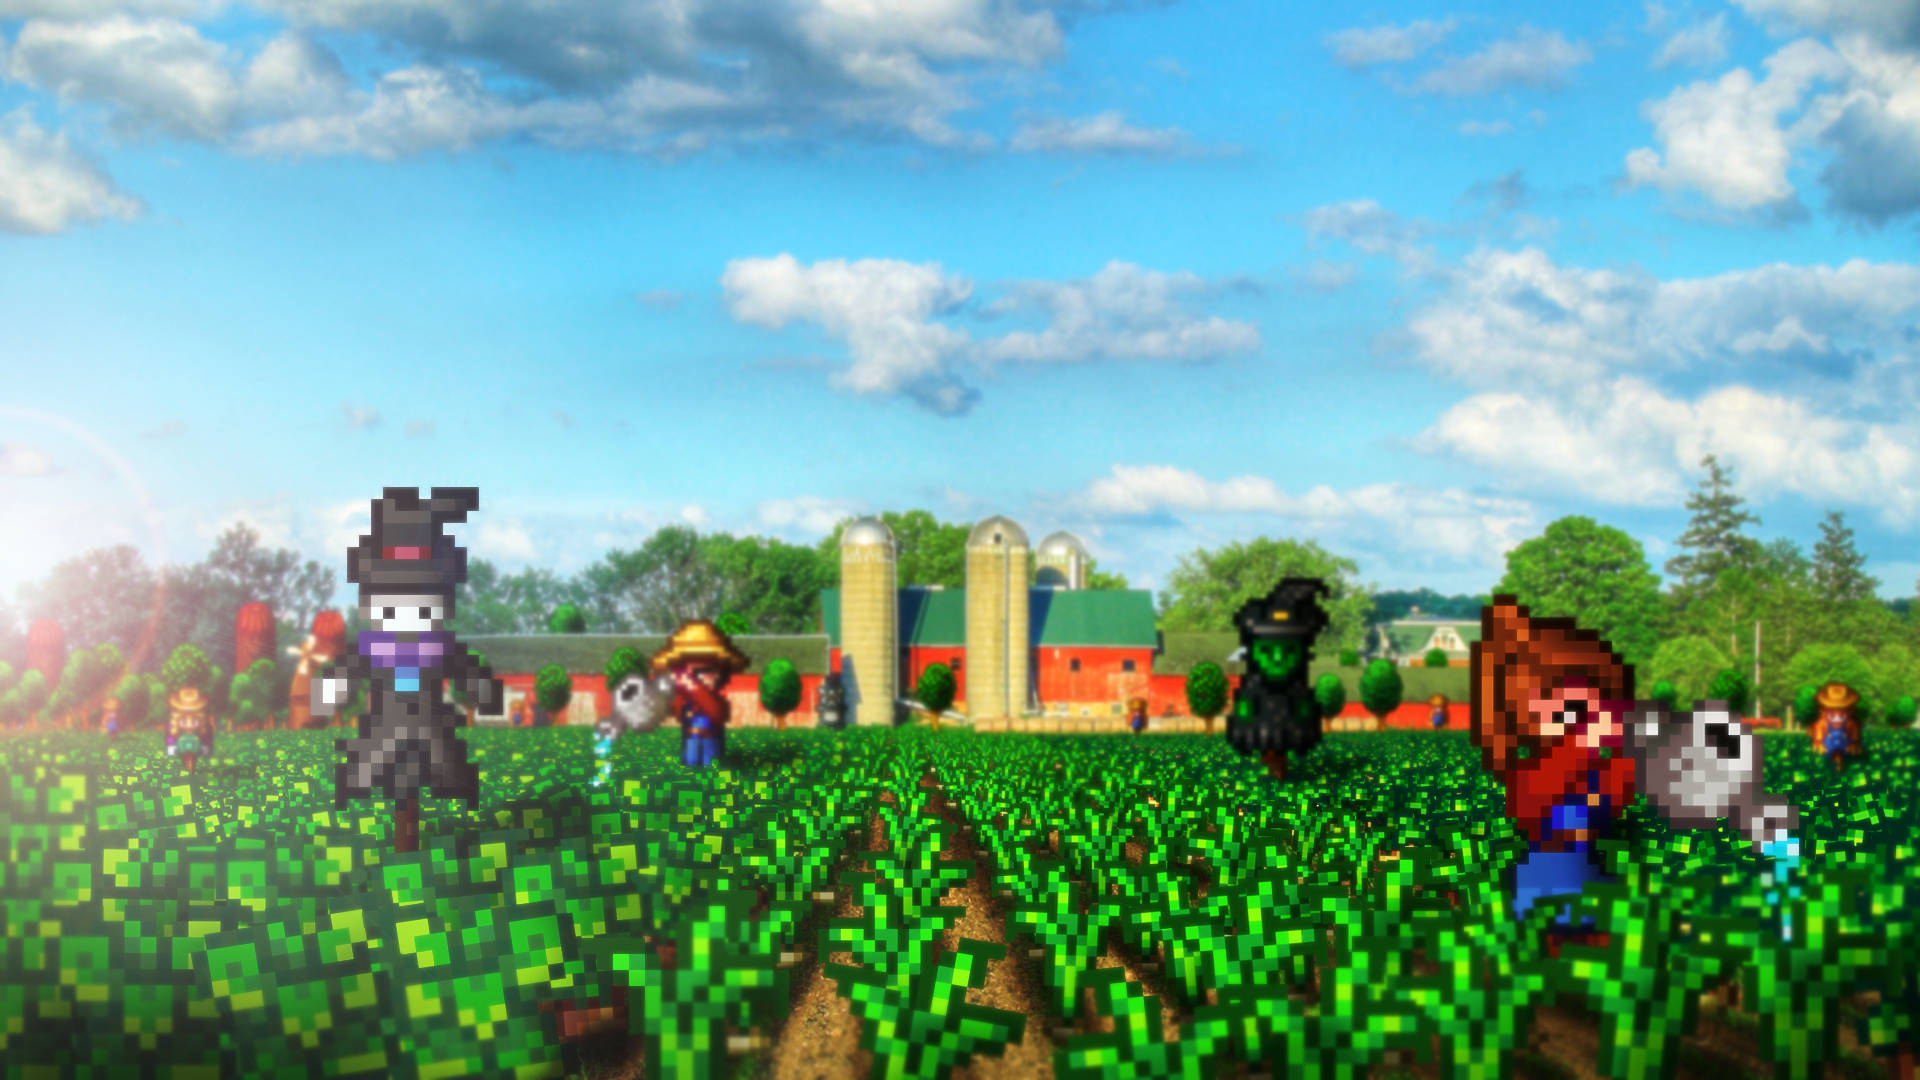 Top 999+ Stardew Valley Wallpaper Full HD, 4K✅Free to Use